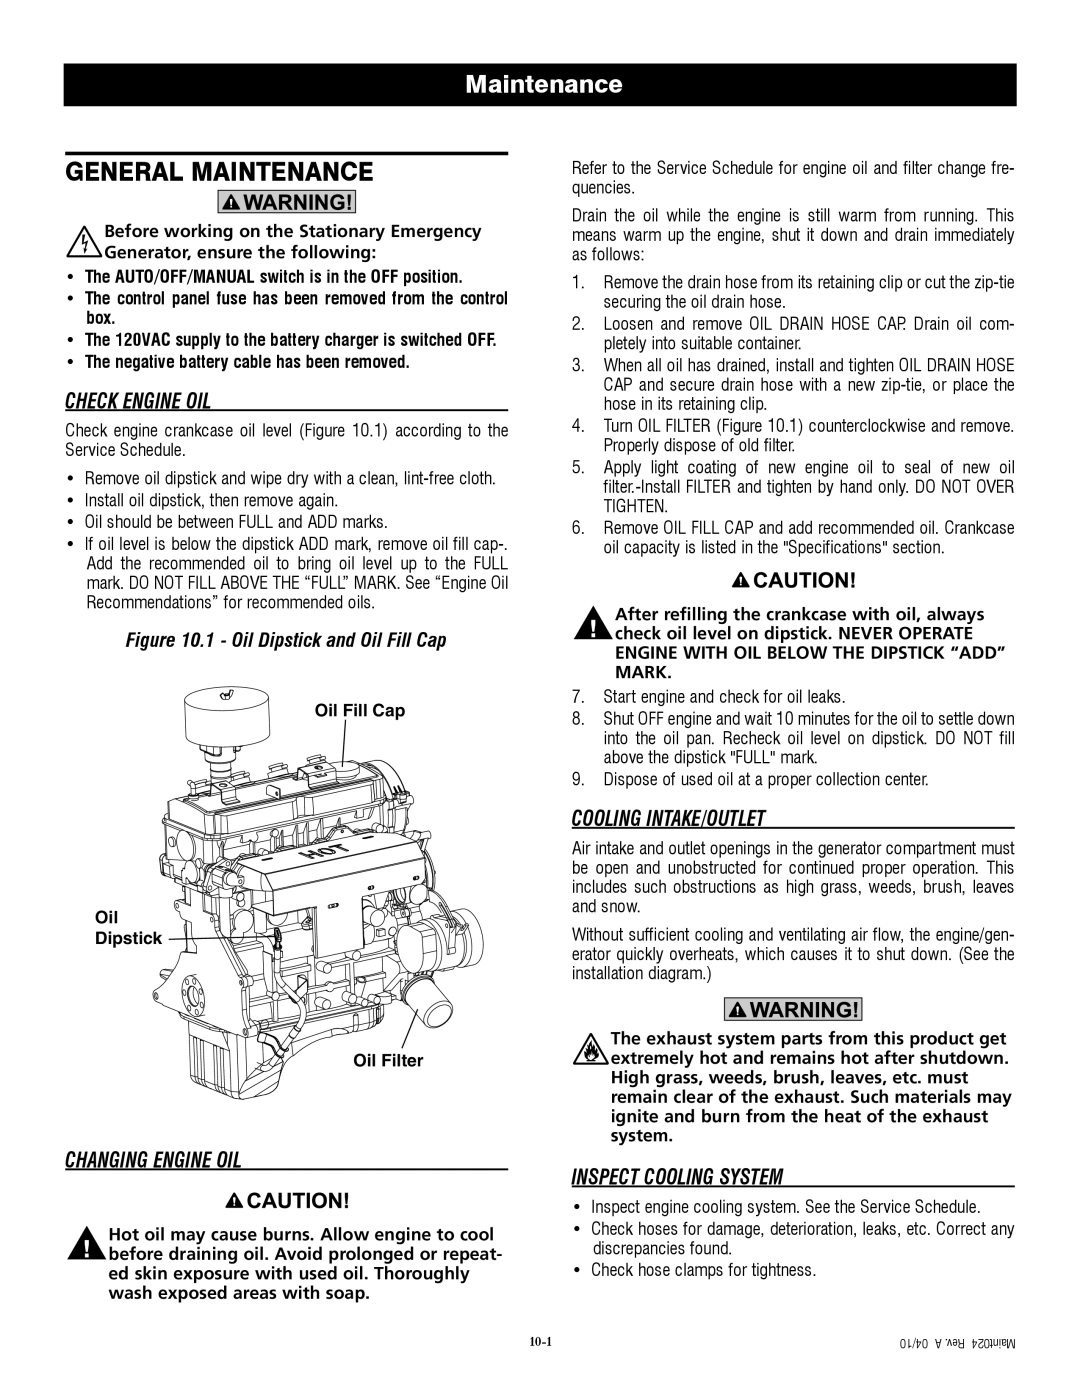 Generac QT04524ANSX owner manual General Maintenance, Check Engine Oil, Changing Engine Oil, Cooling Intake/Outlet 